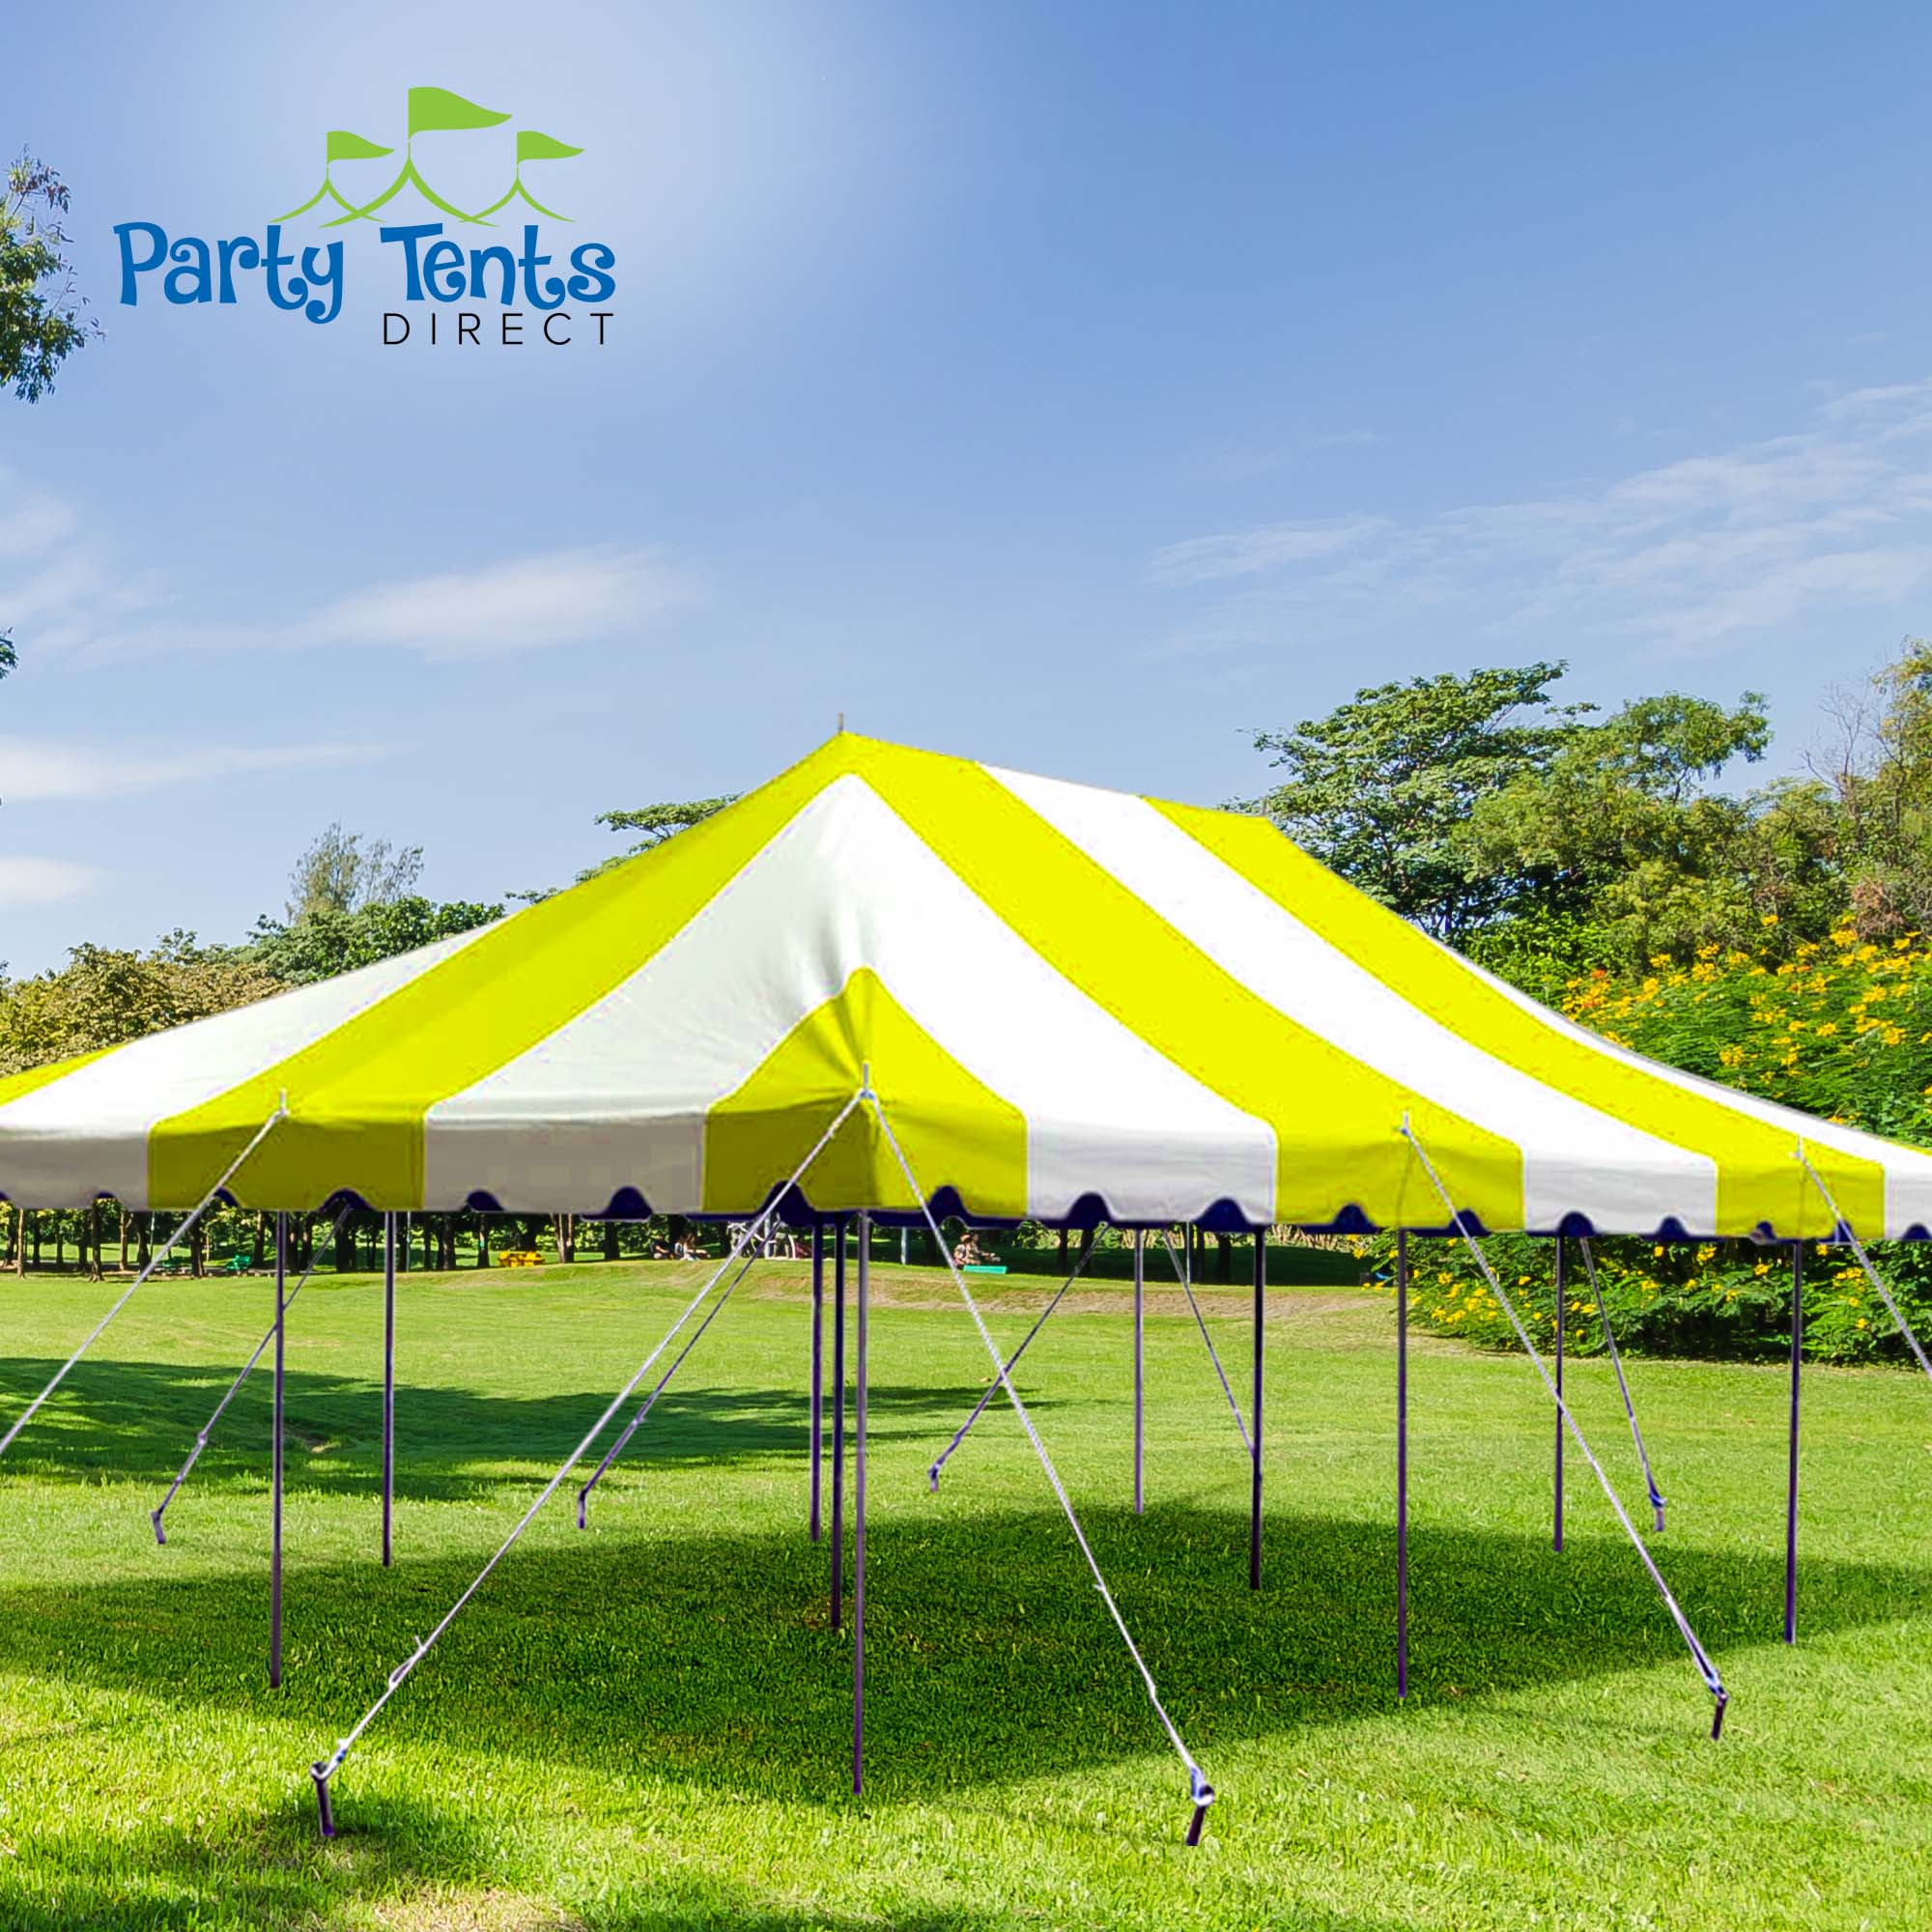 Party Tents Direct Weekender Outdoor Canopy Pole Tent, Yellow, 20 ft x 30 ft